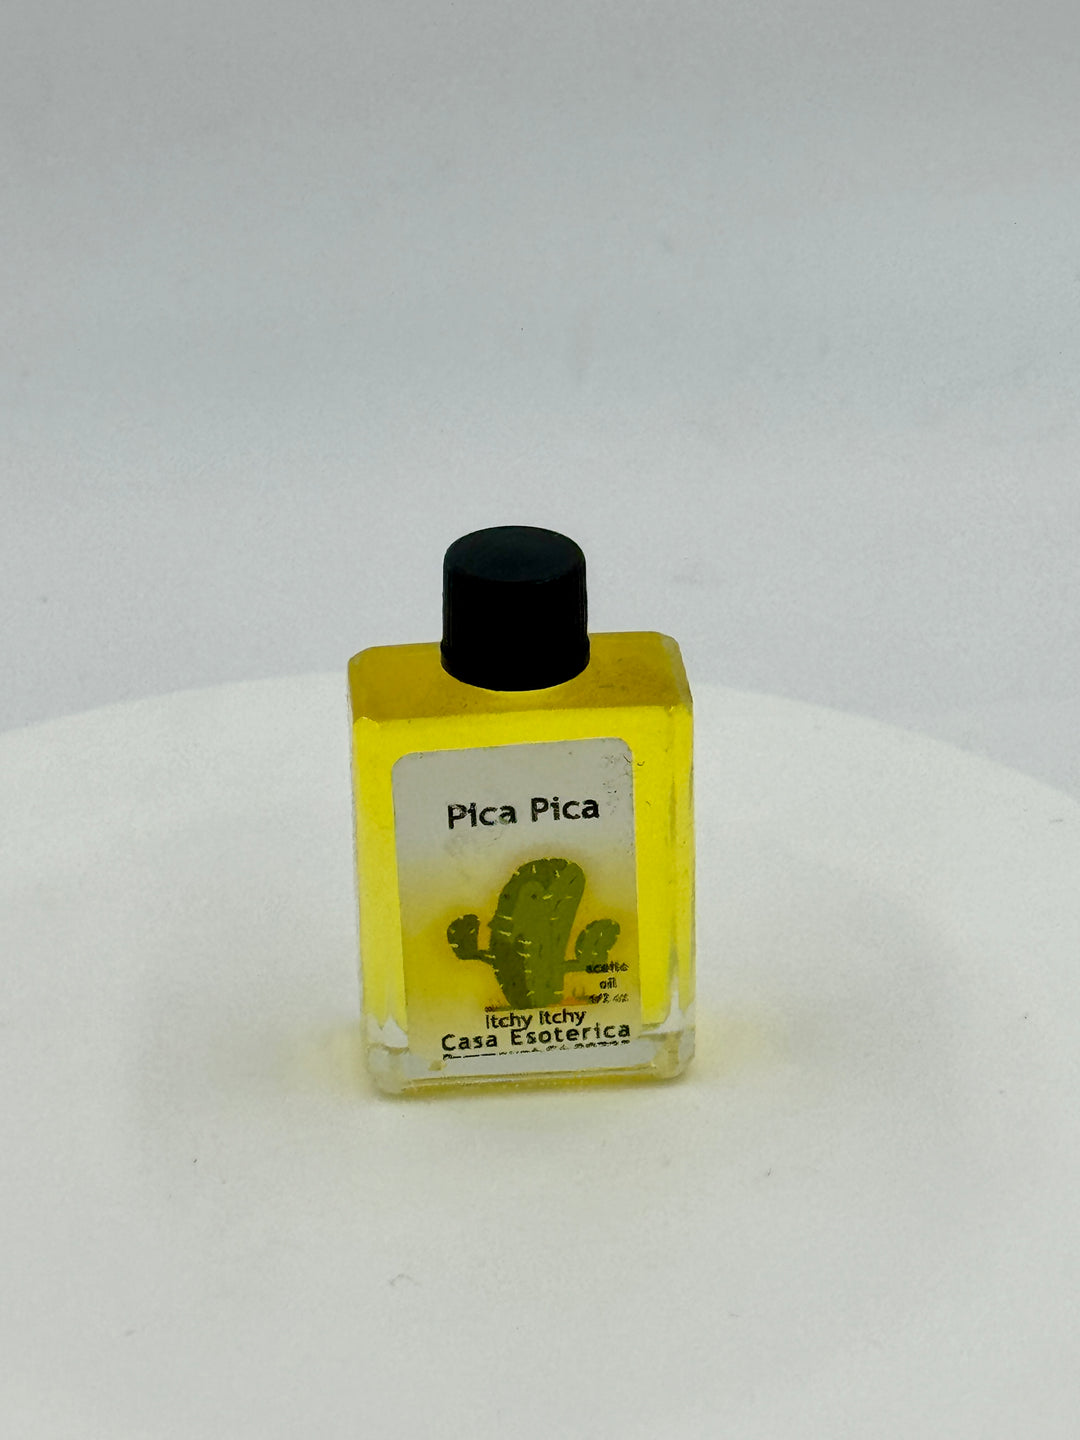 ITCHY ITCHY (PICA PICA) -Oil/Aceite